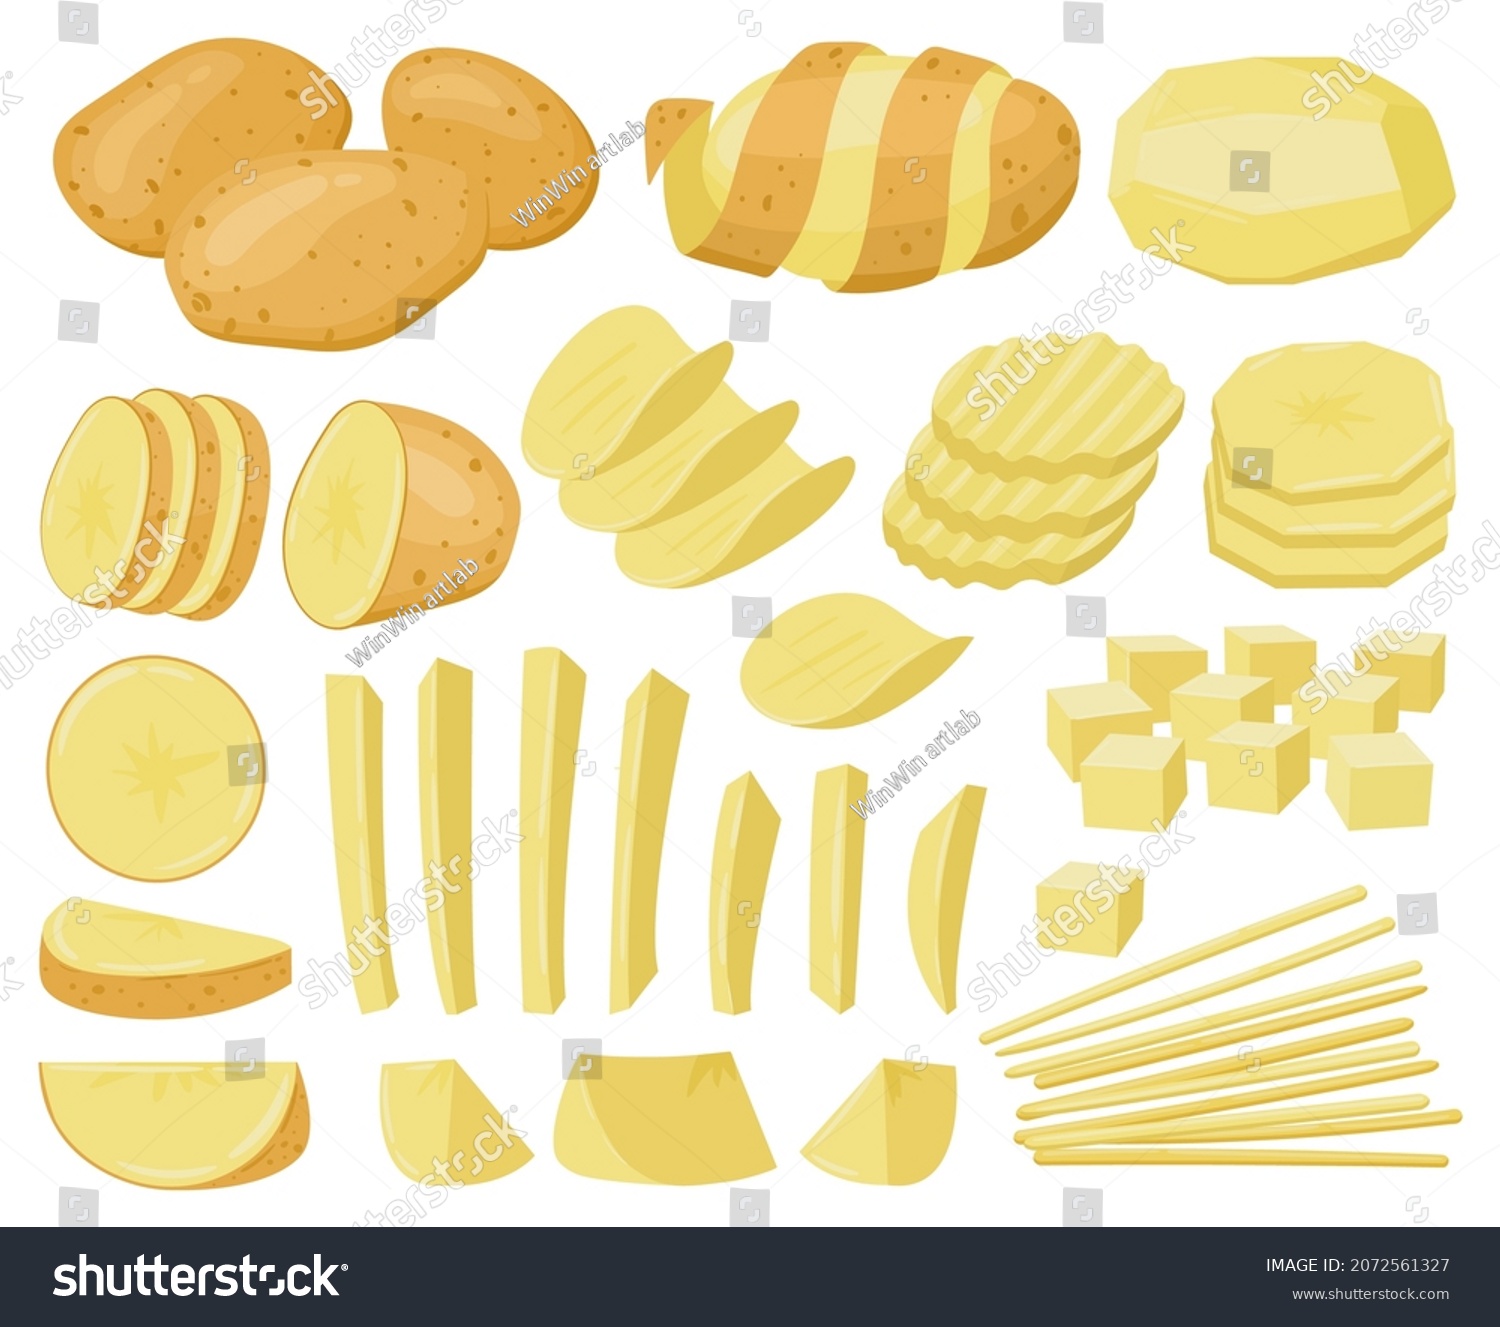 Cartoon potato, raw sliced potatoes, french fries, chips. Potatoes vegetable products, chopped and peeled potatoes vector illustration set. Ripe, tasty potato vegetable. Food vegetable cartoon #2072561327